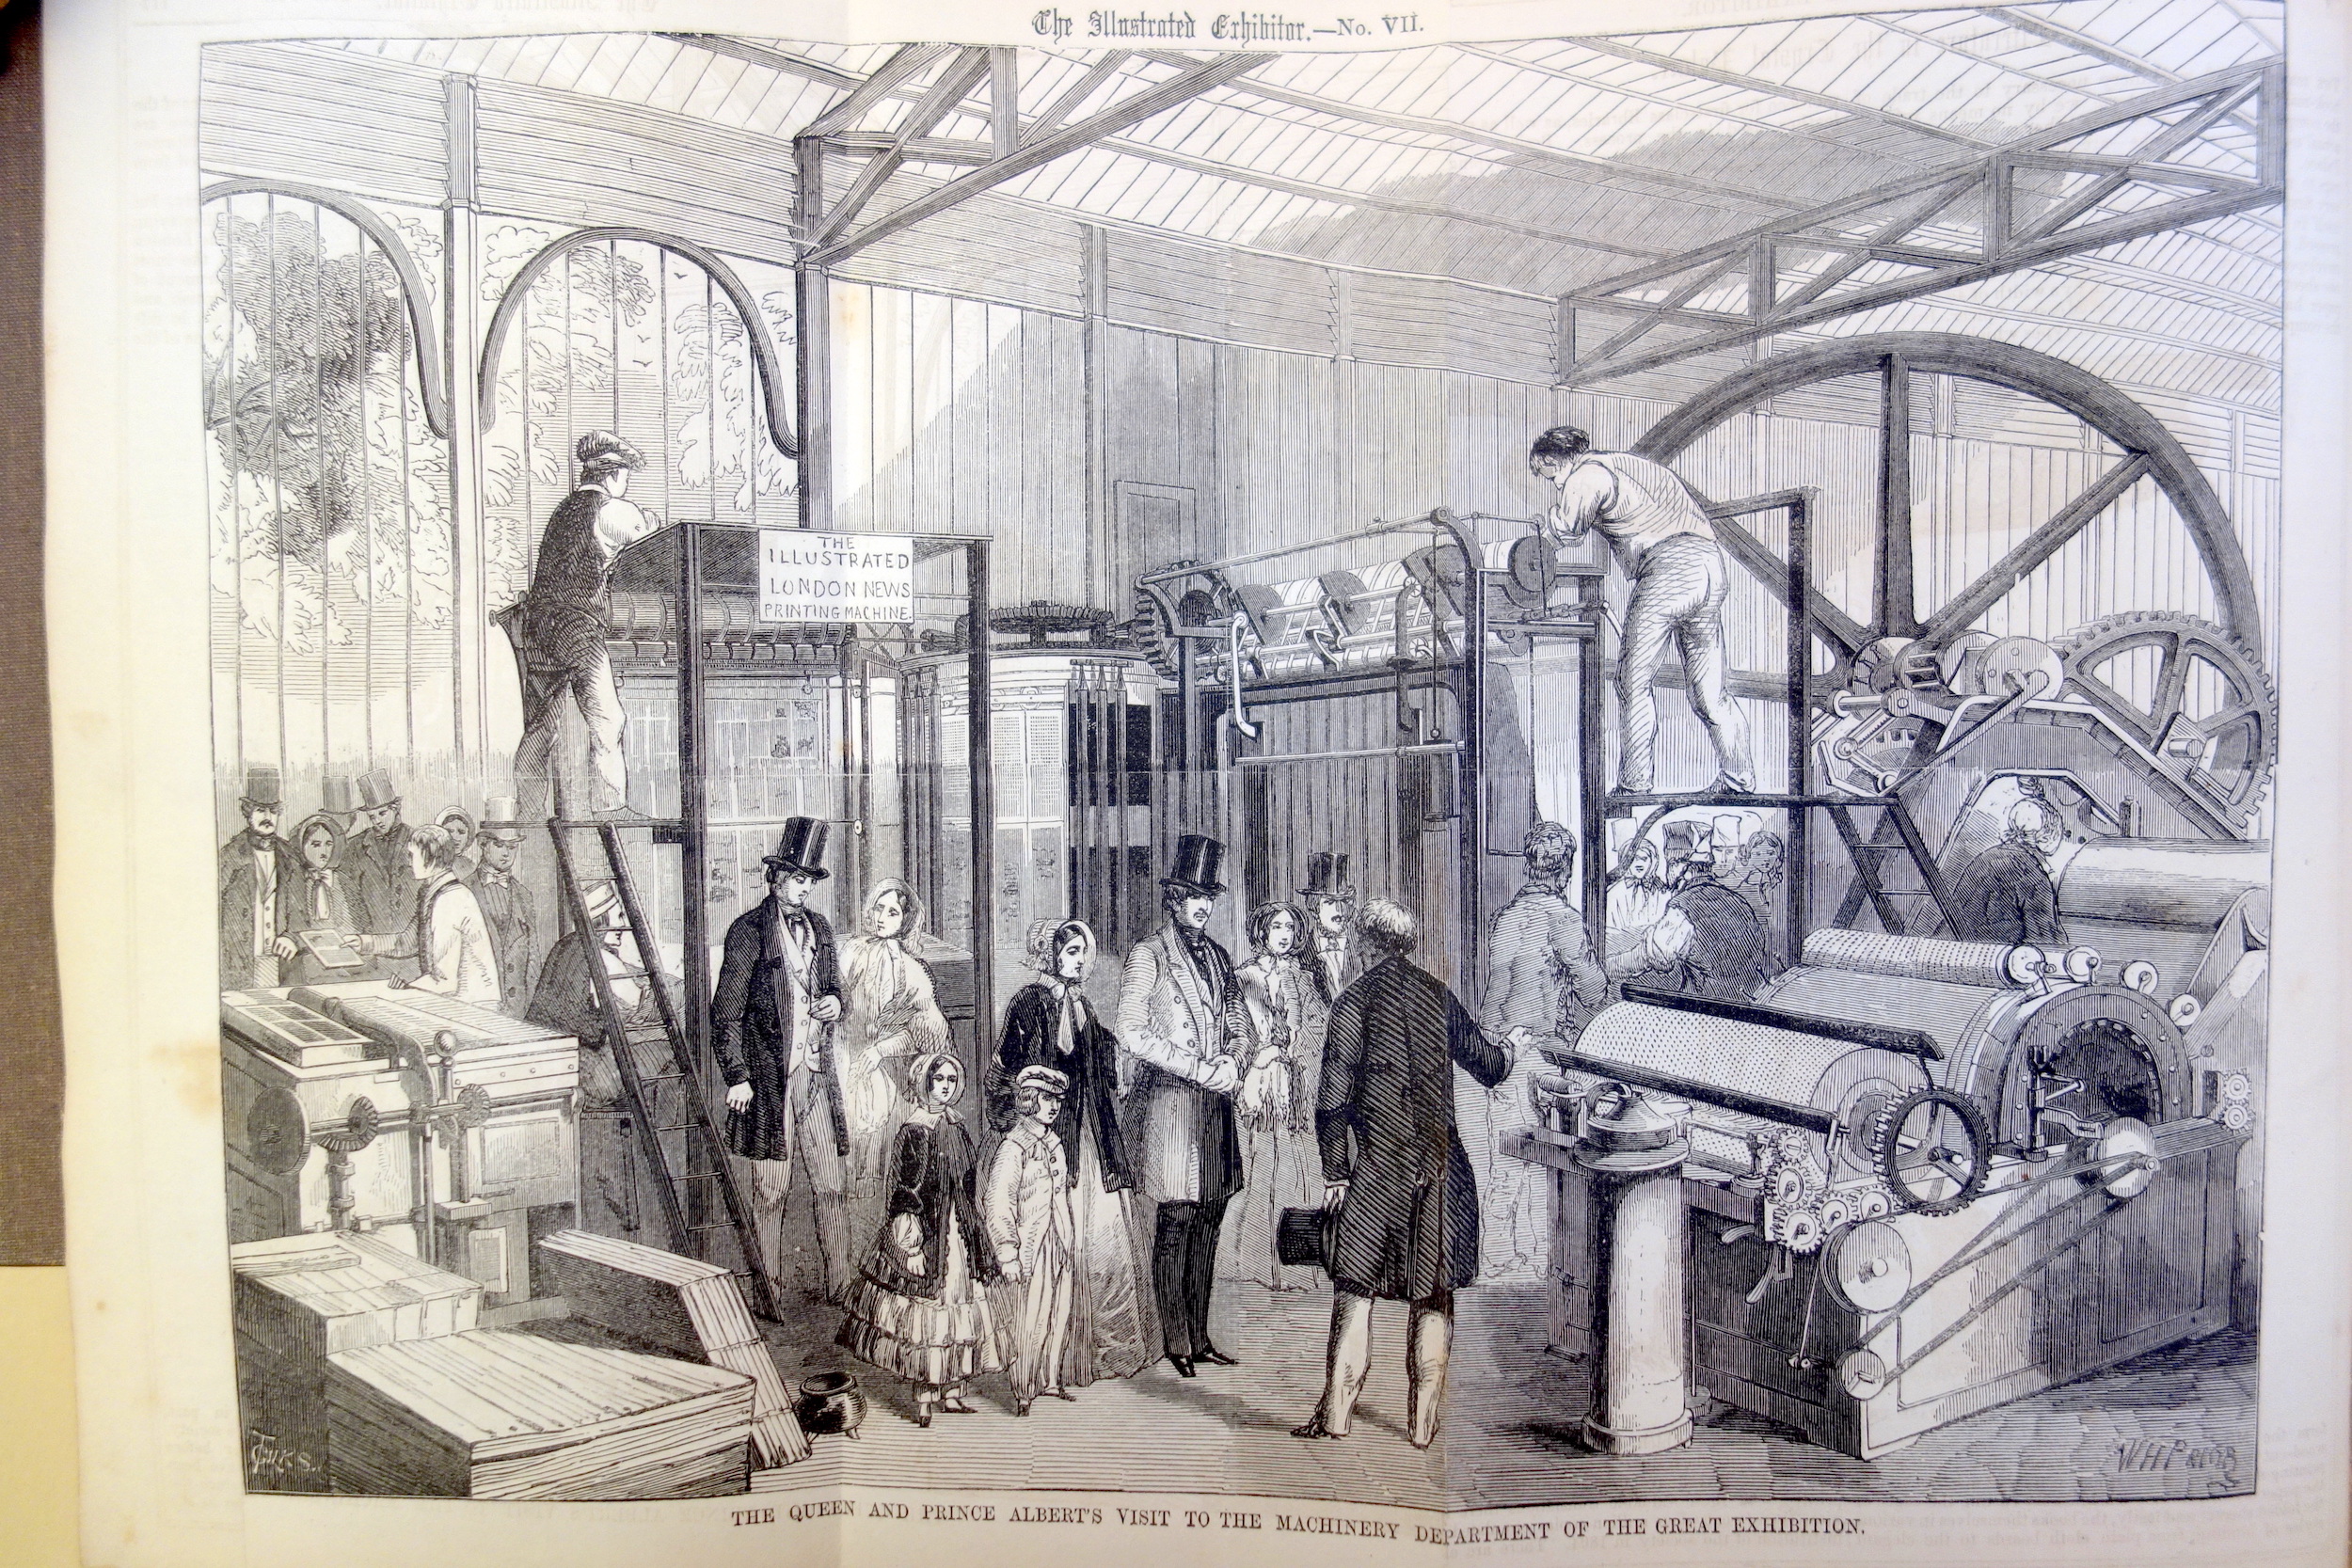 Victoria & Albert visit the machinery department at the Great Exhibition